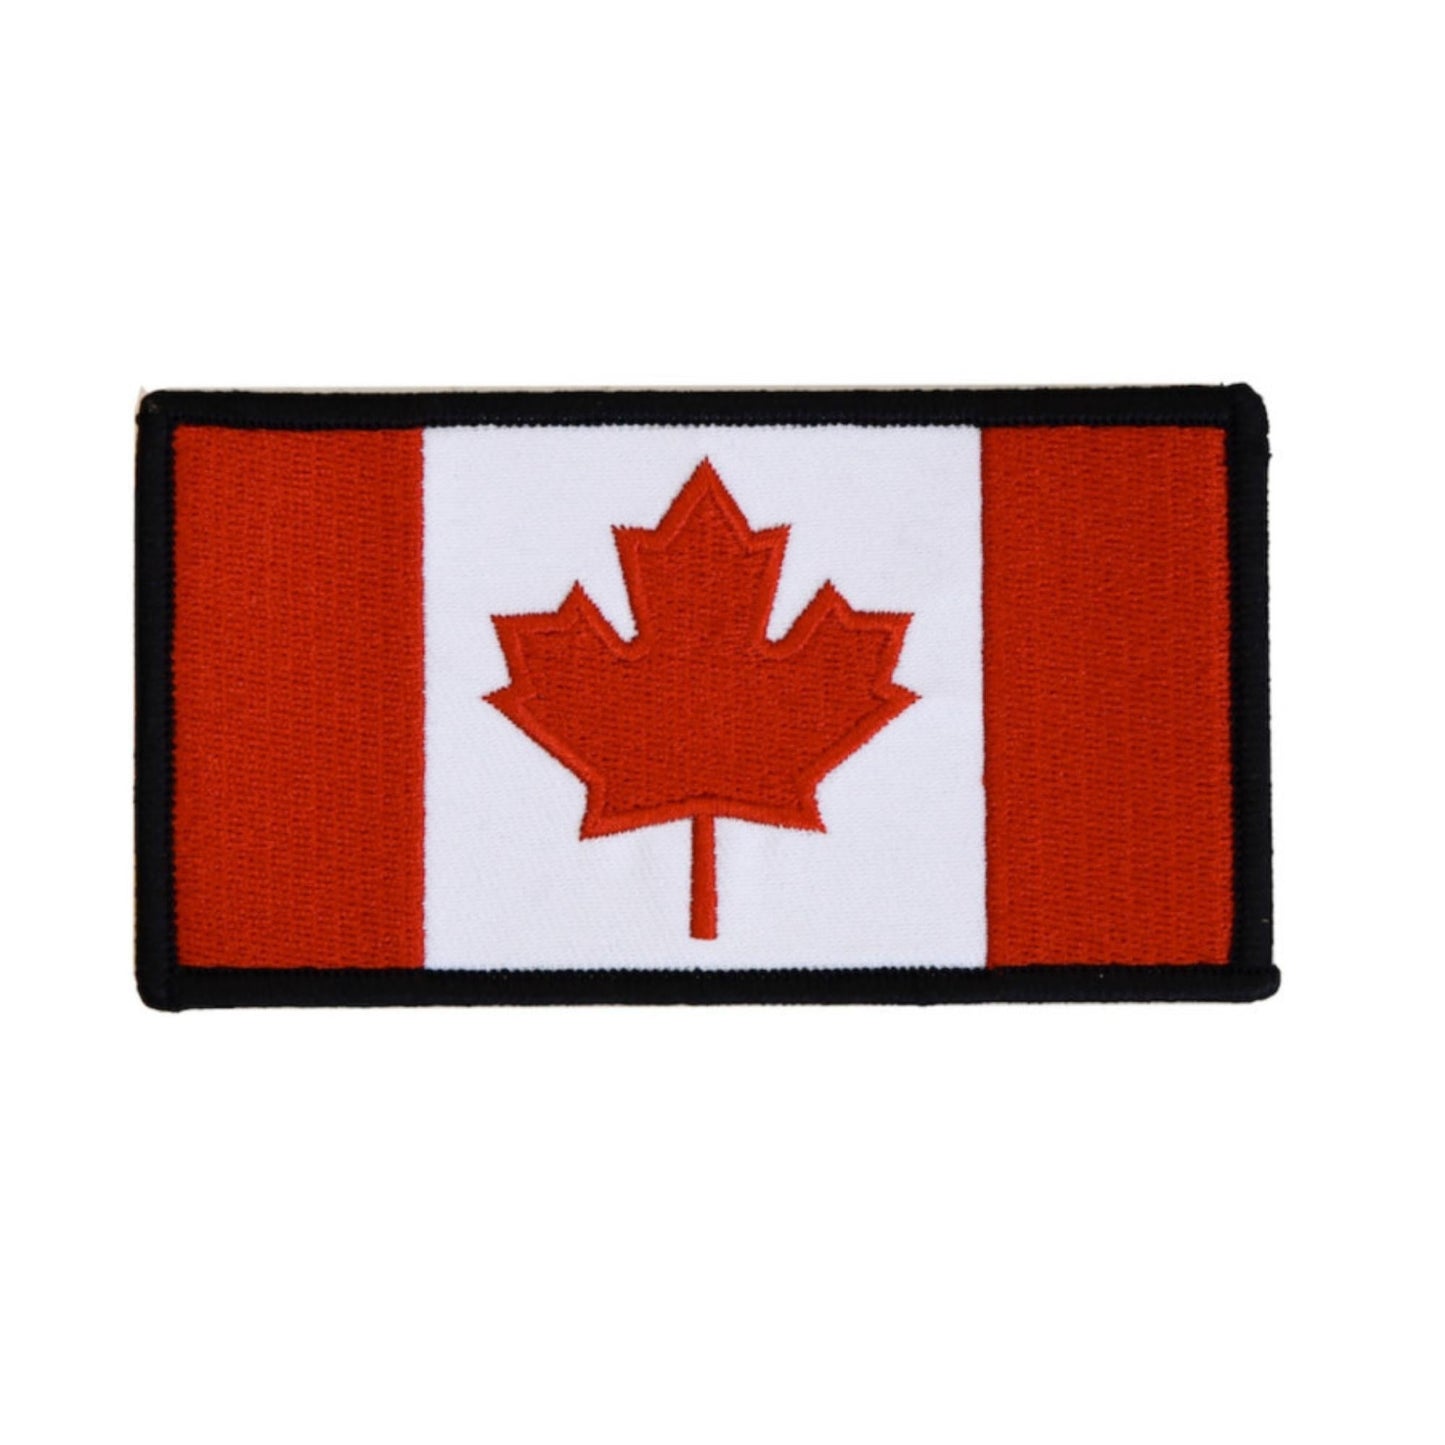 Boss Dog Tactical Harness Patch Full Color Candian Flag, 6ea/Large